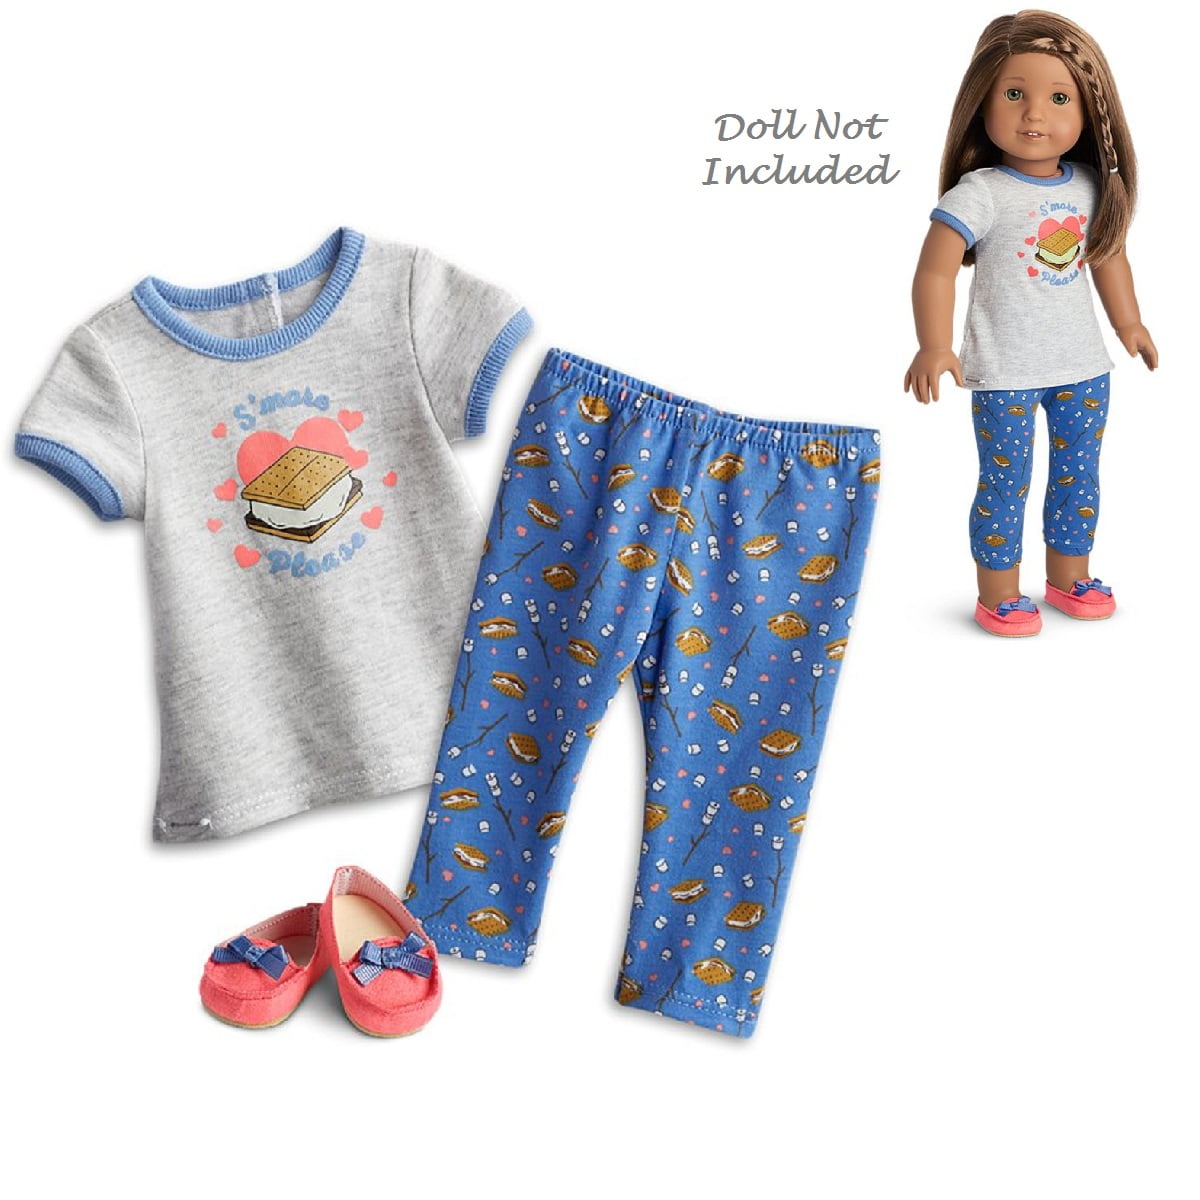 Brand new American Girl doll truly me Holiday dreams pajamas for doll 